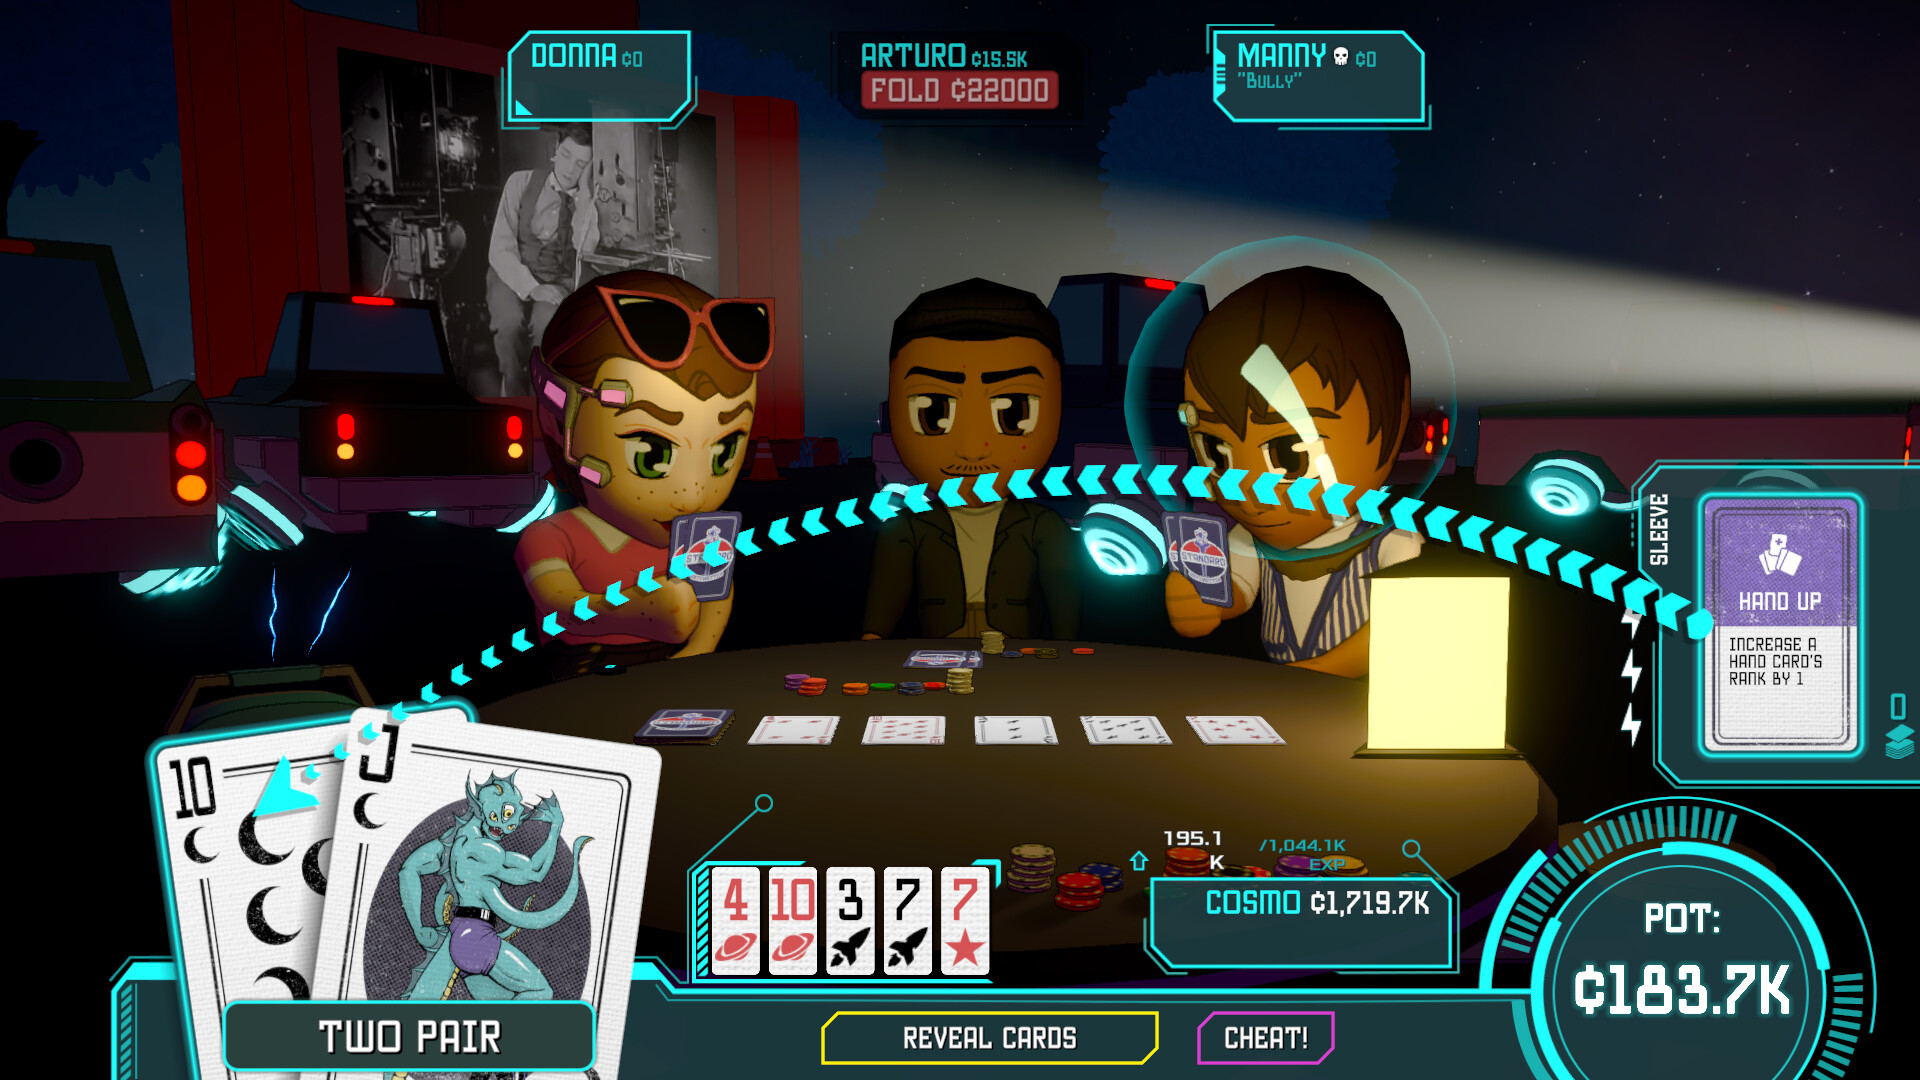 Cosmo Cheats at Poker Steam CD Key 5.54 $